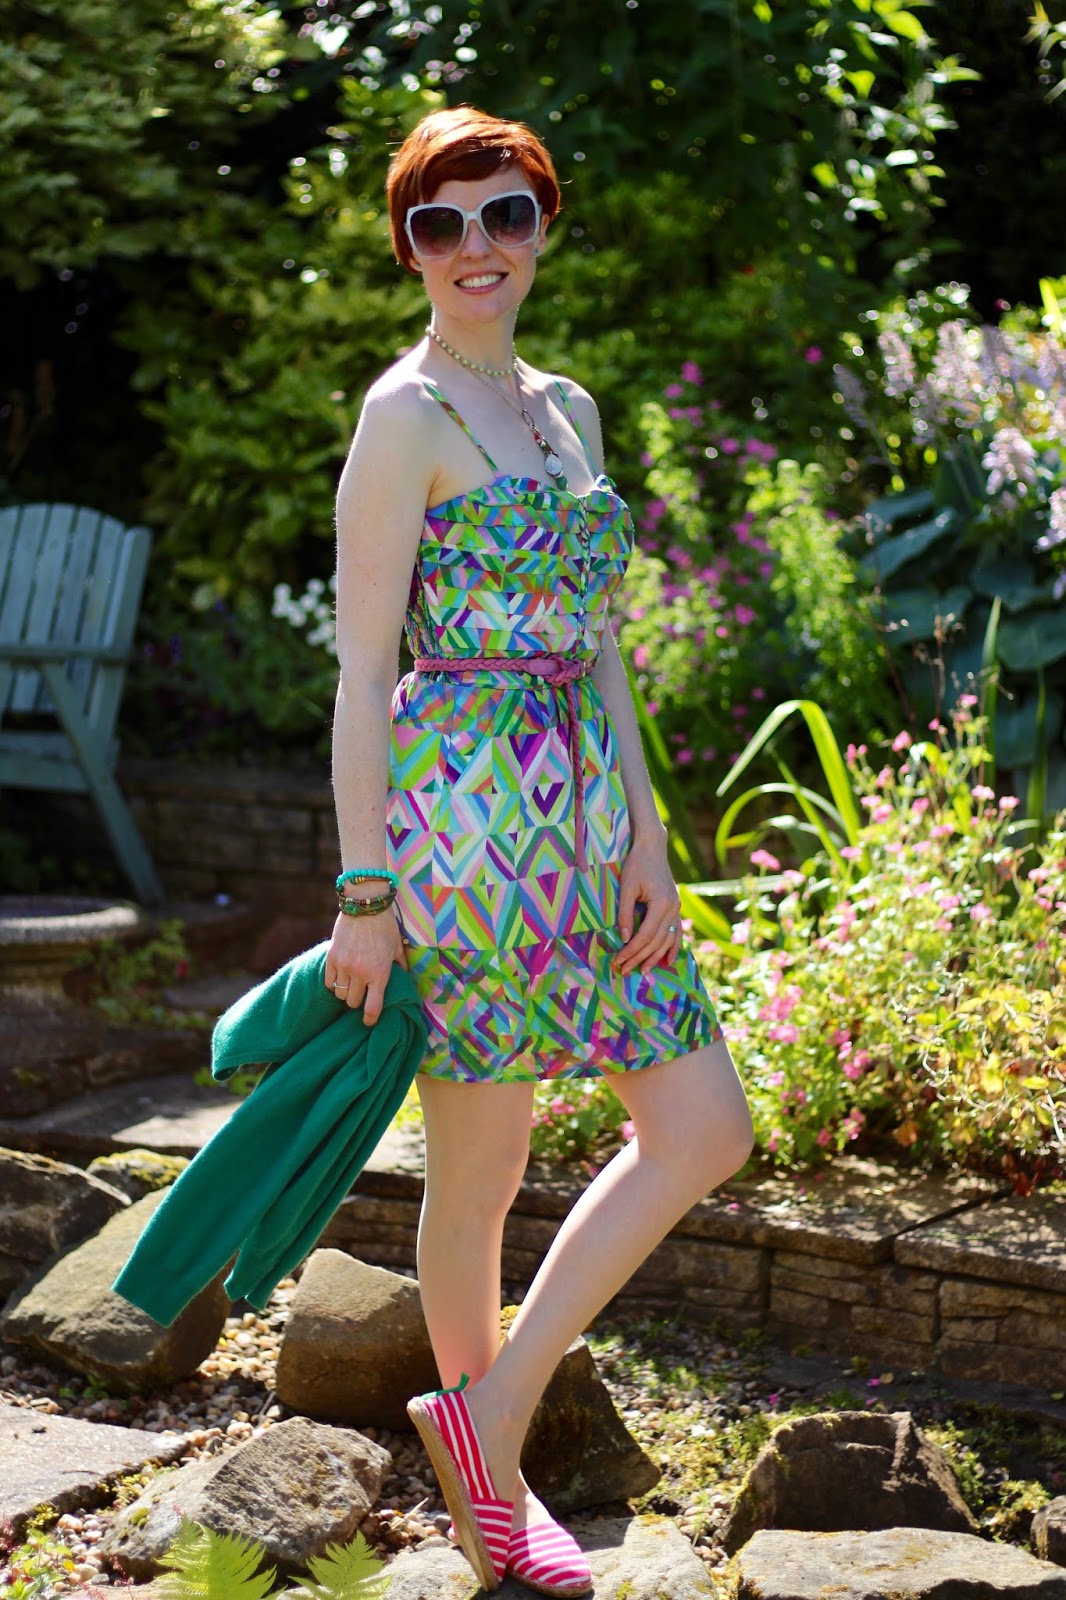 Fake Fabulous | What makes a summer dress frumpy? Summer dress, espadrilles and oversized glasses | Green, Pink and White. 